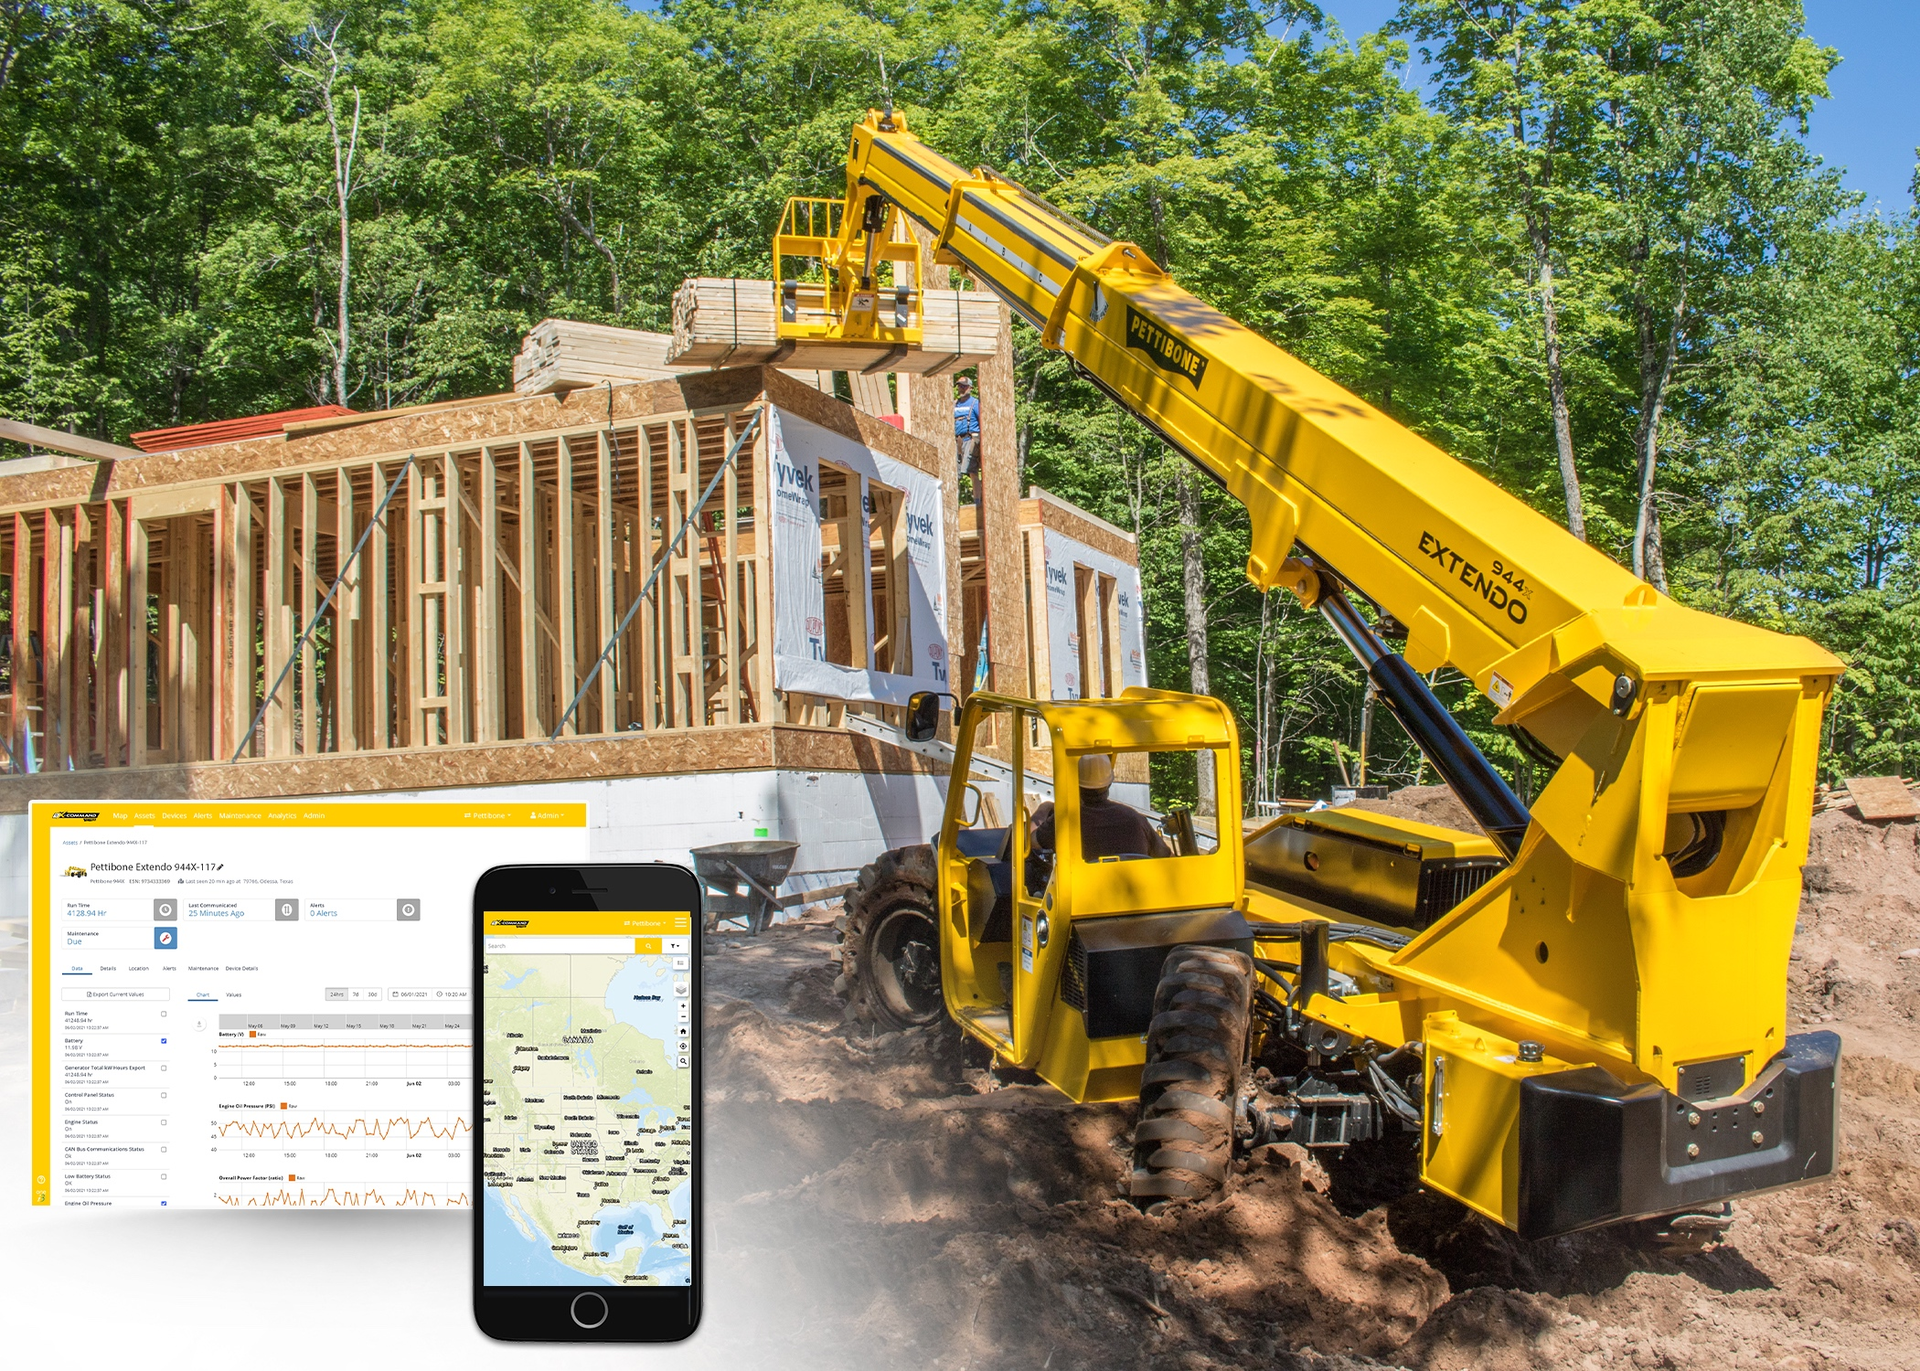 Pettibone X-Command allows owners to monitor equipment location and performance.